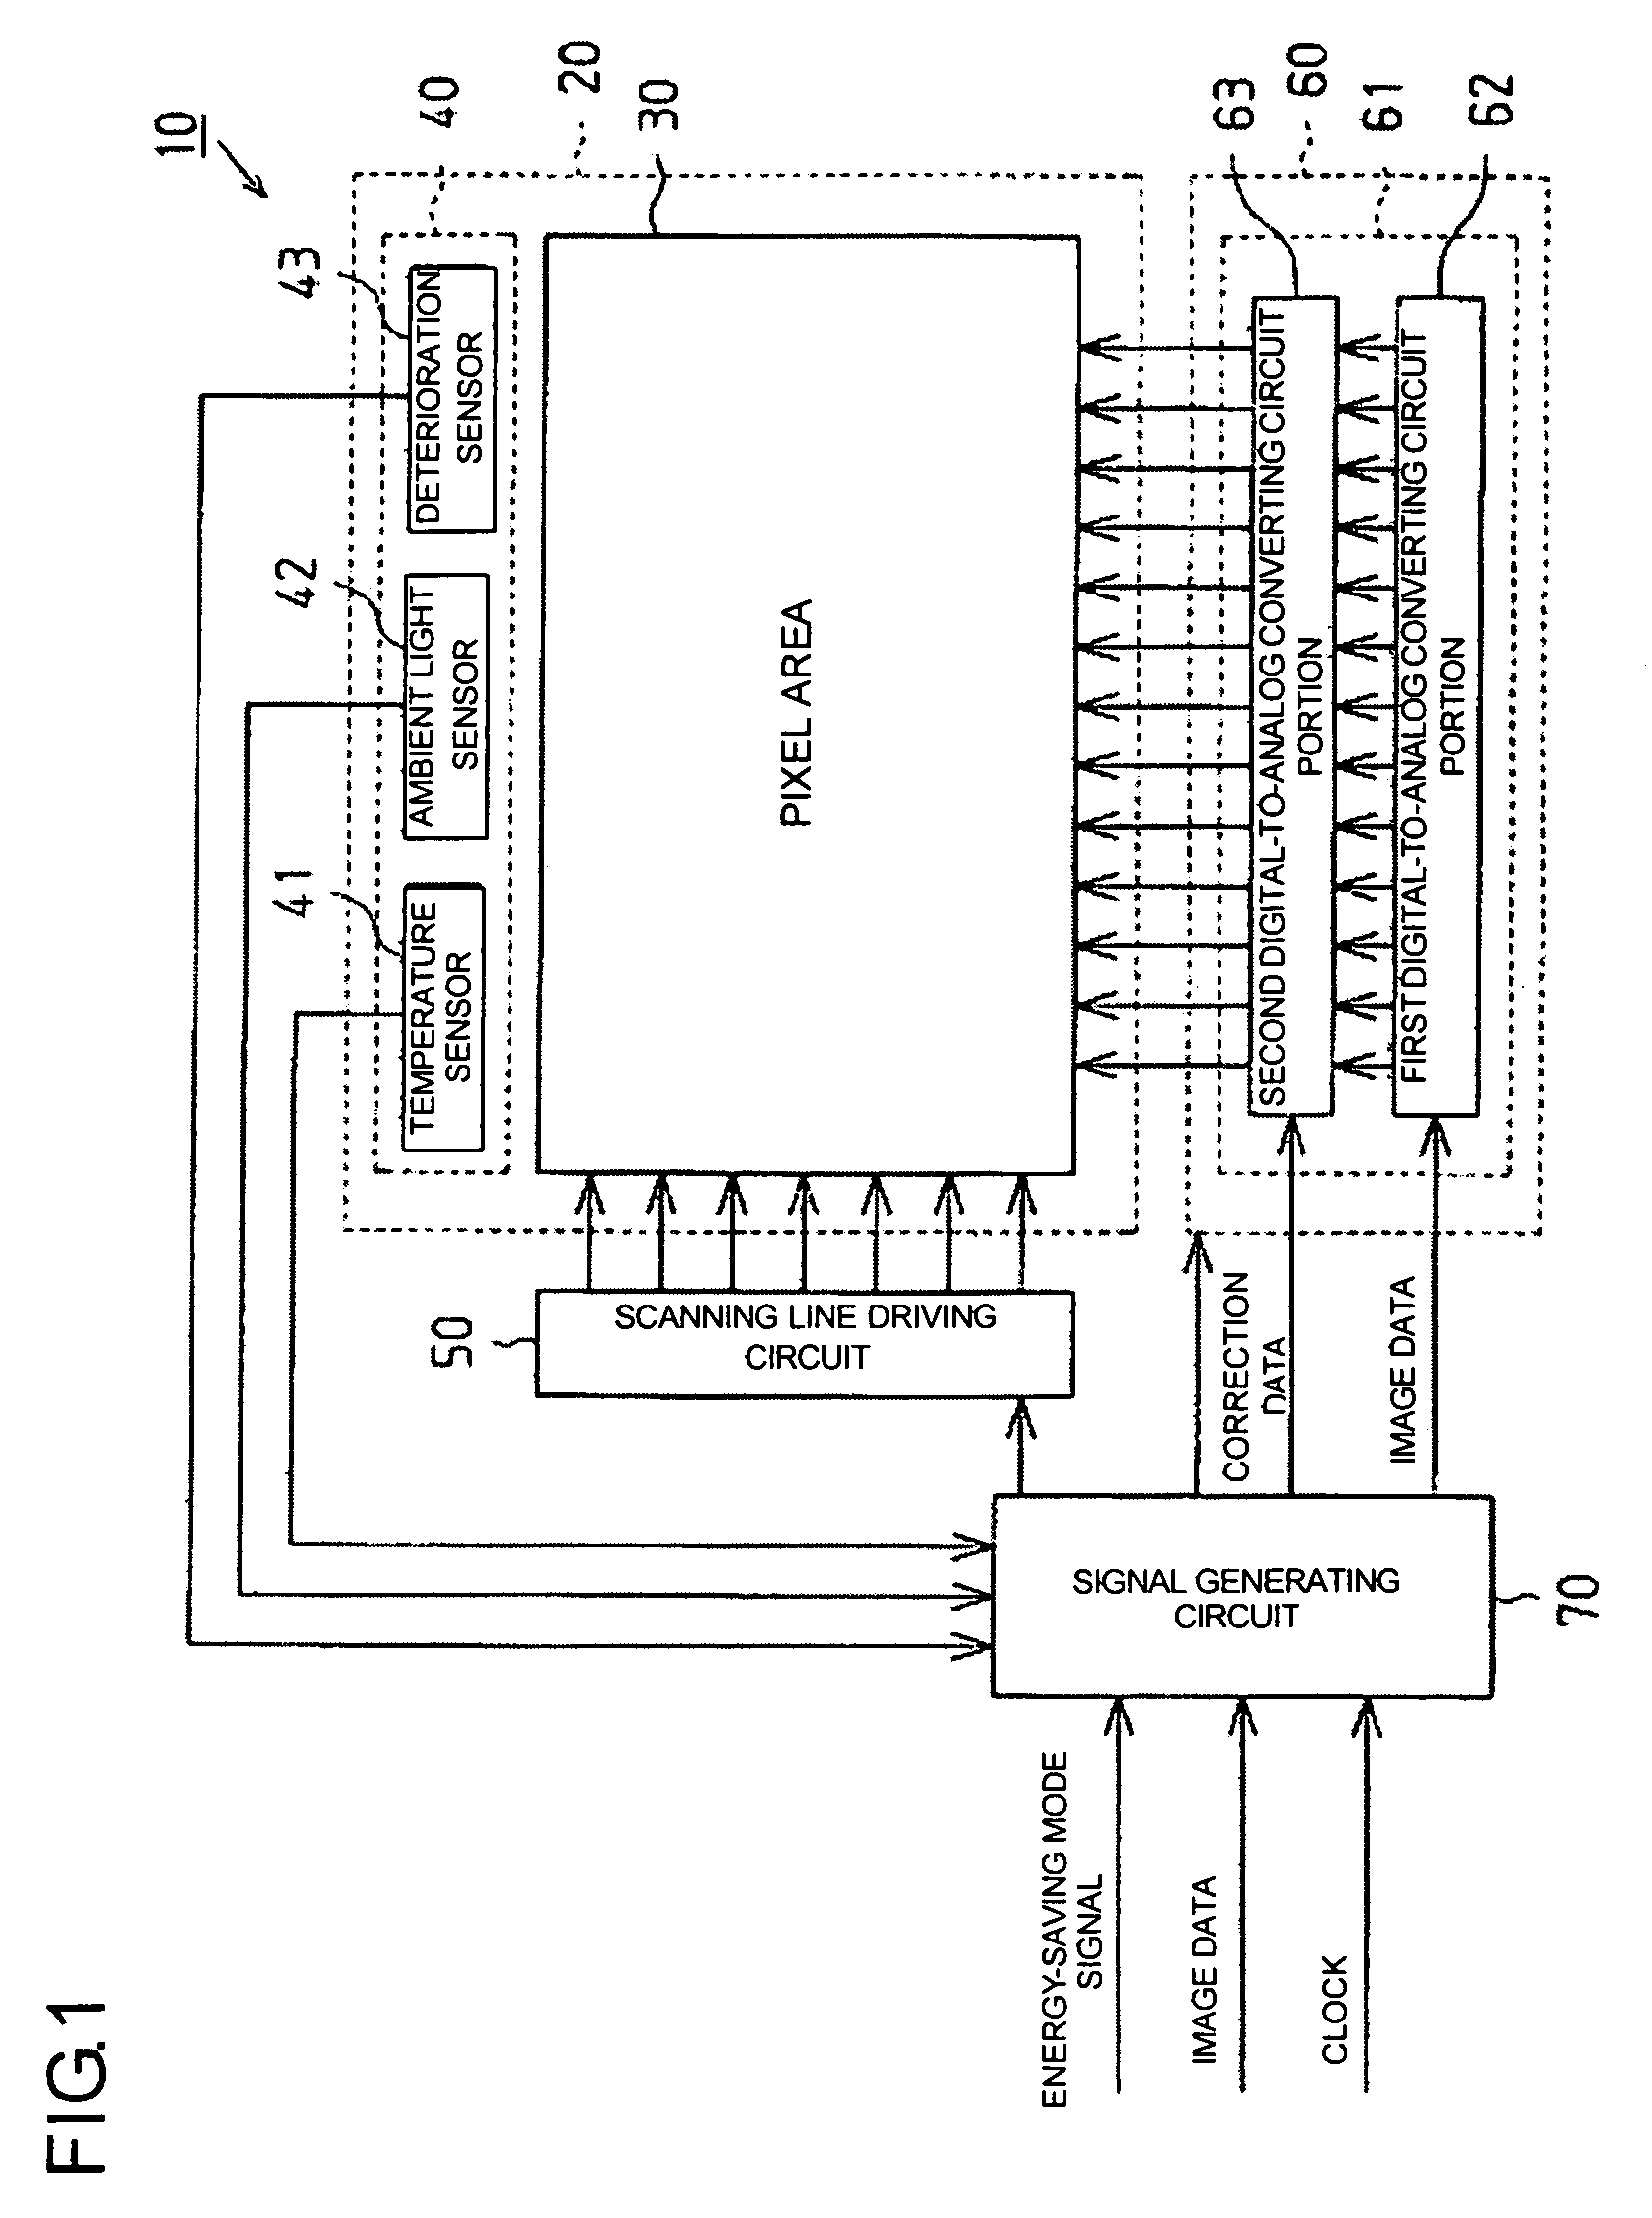 Digital-to-analog converting circuit, electrooptical device, and electronic apparatus